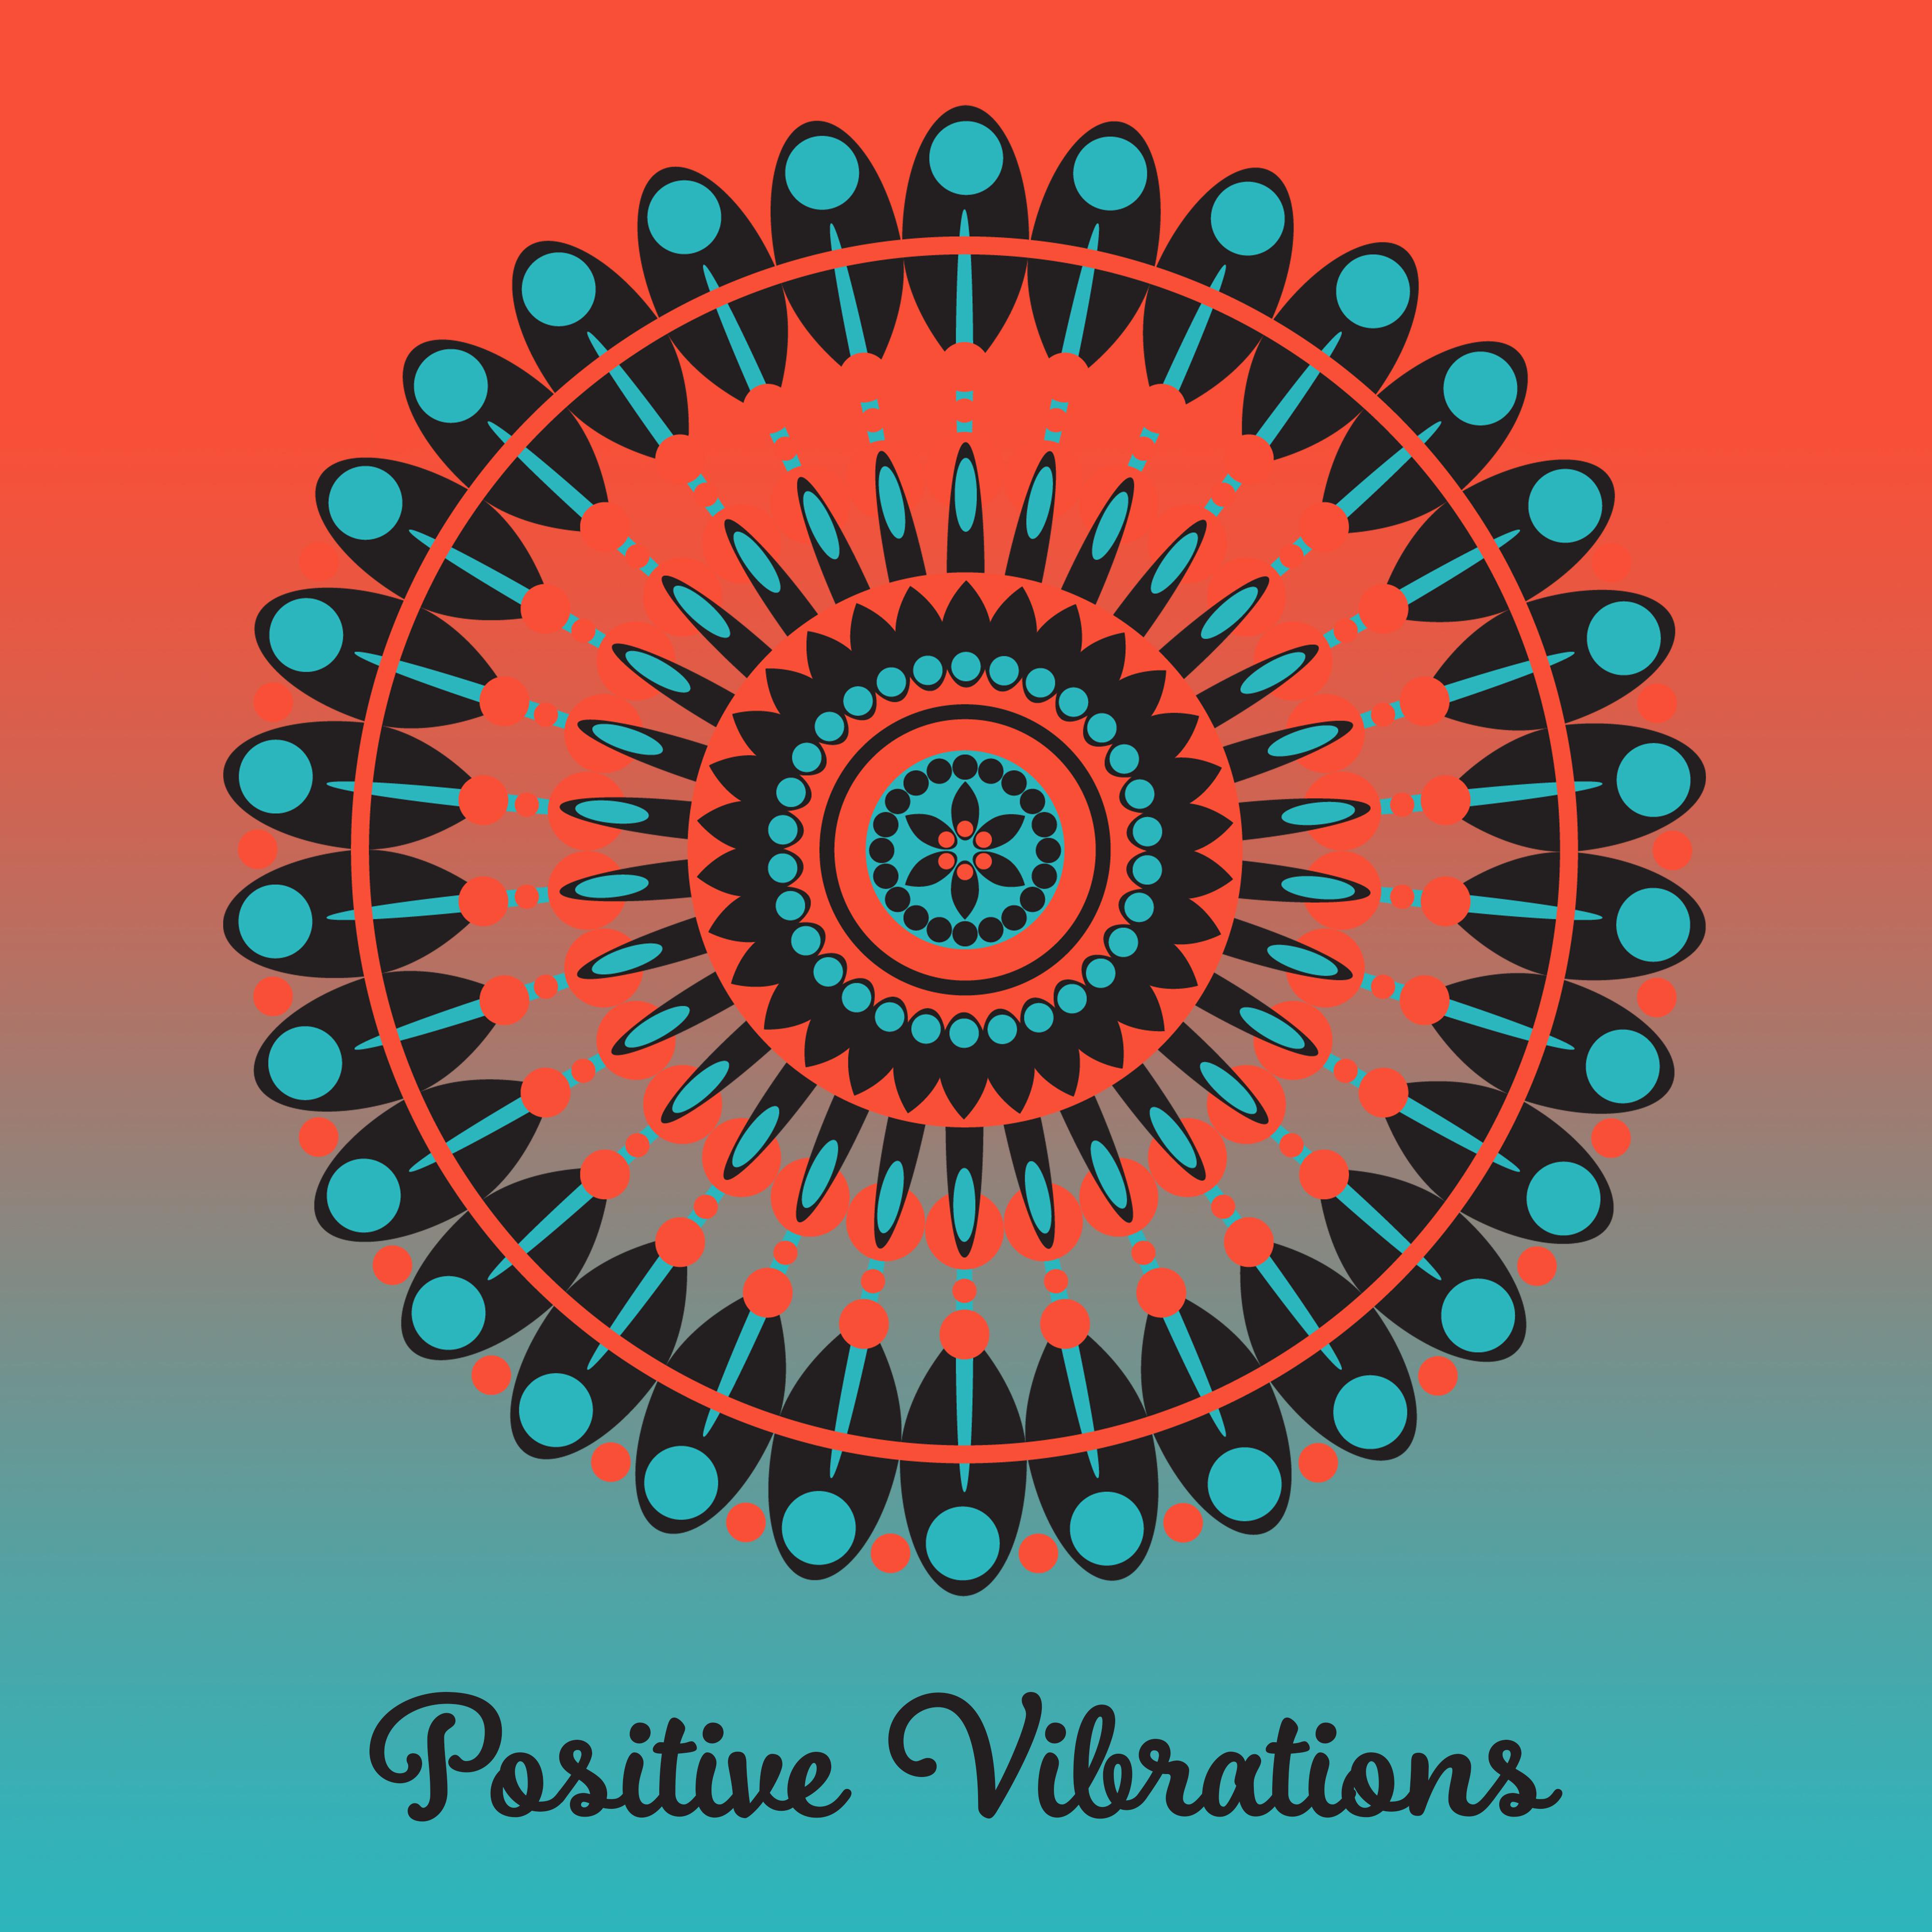 Positive Vibrations  New Age 2017, Relaxing Music, Sounds of Nature, Zen, Bliss, Healing Natural Melodies